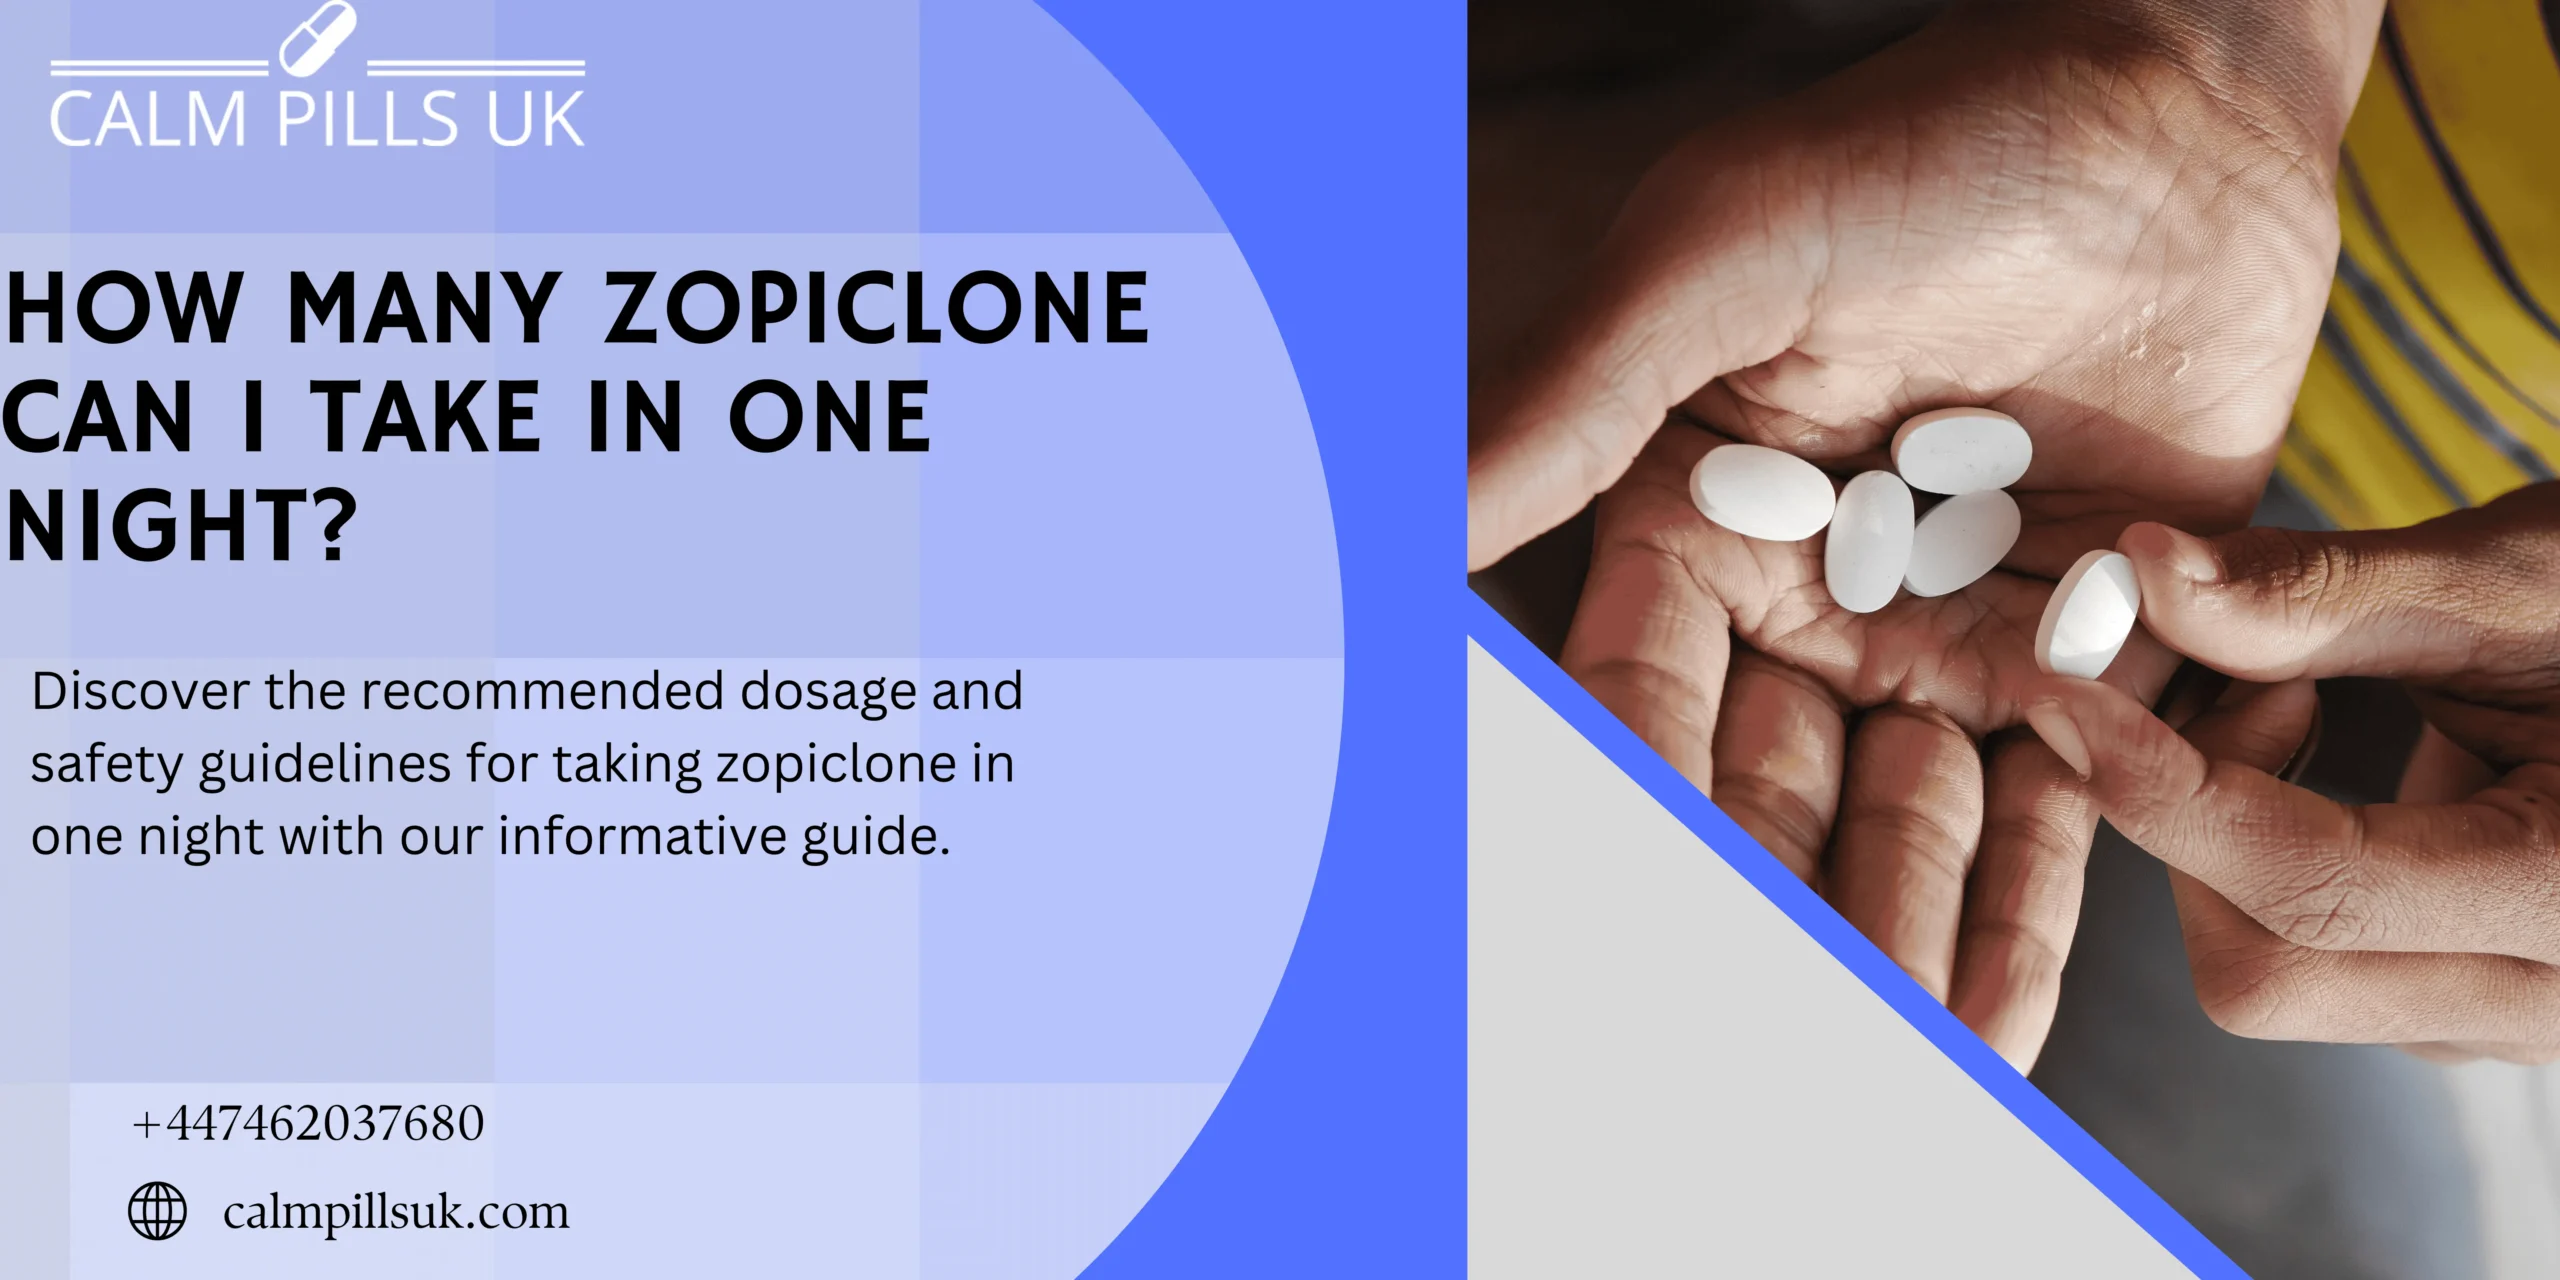 How Many Zopiclone Can I Take in One Night?